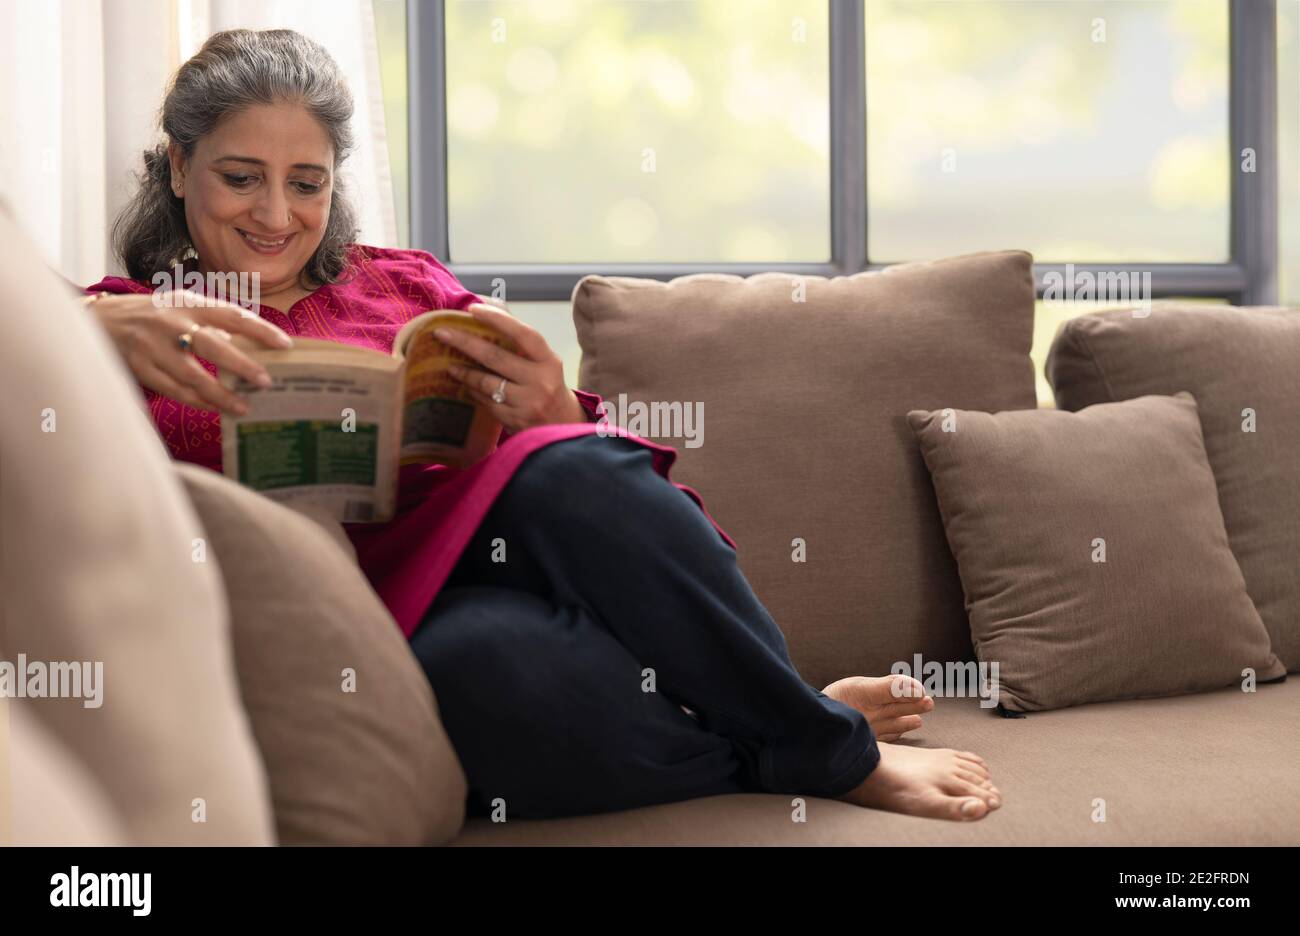 AN OLD WOMAN HAPPILY READING A BOOK WHILE SITTING COMFORTABLY ON SOFA Stock Photo